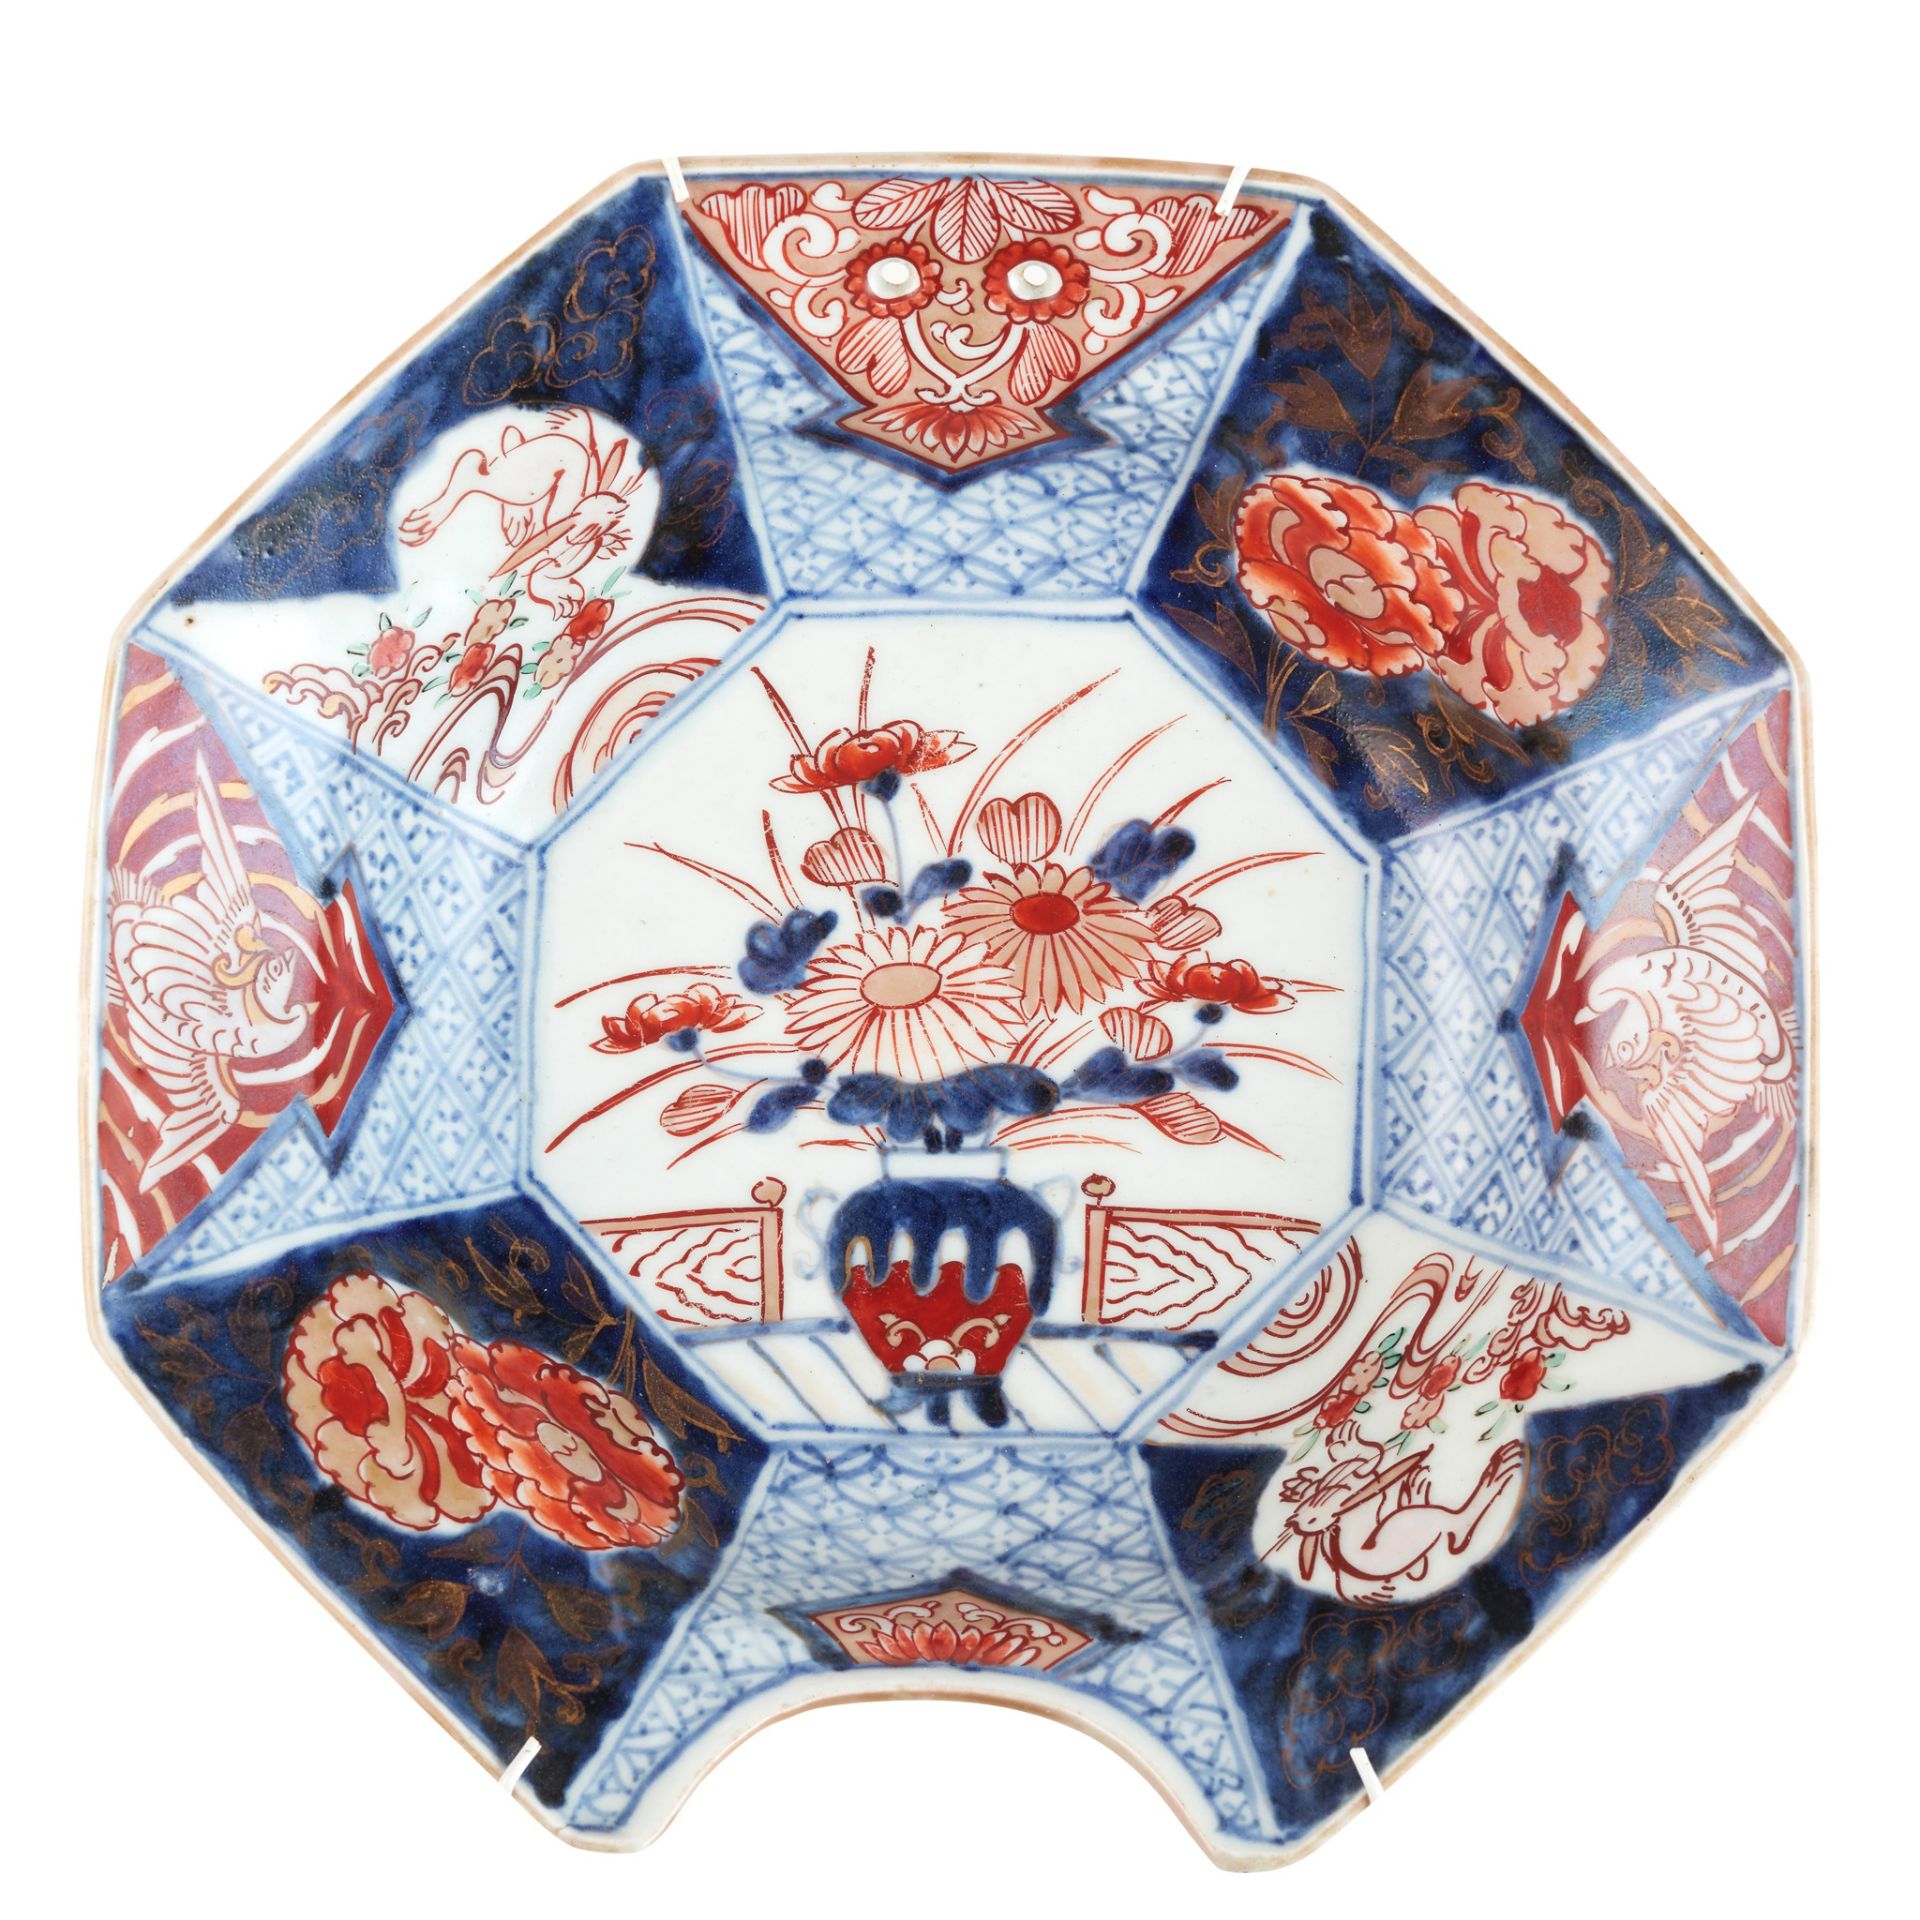 (A PRIVATE SCOTTISH COLLECTION) GROUP OF THREE IMARI WARES MEIJI PERIOD - Image 2 of 3